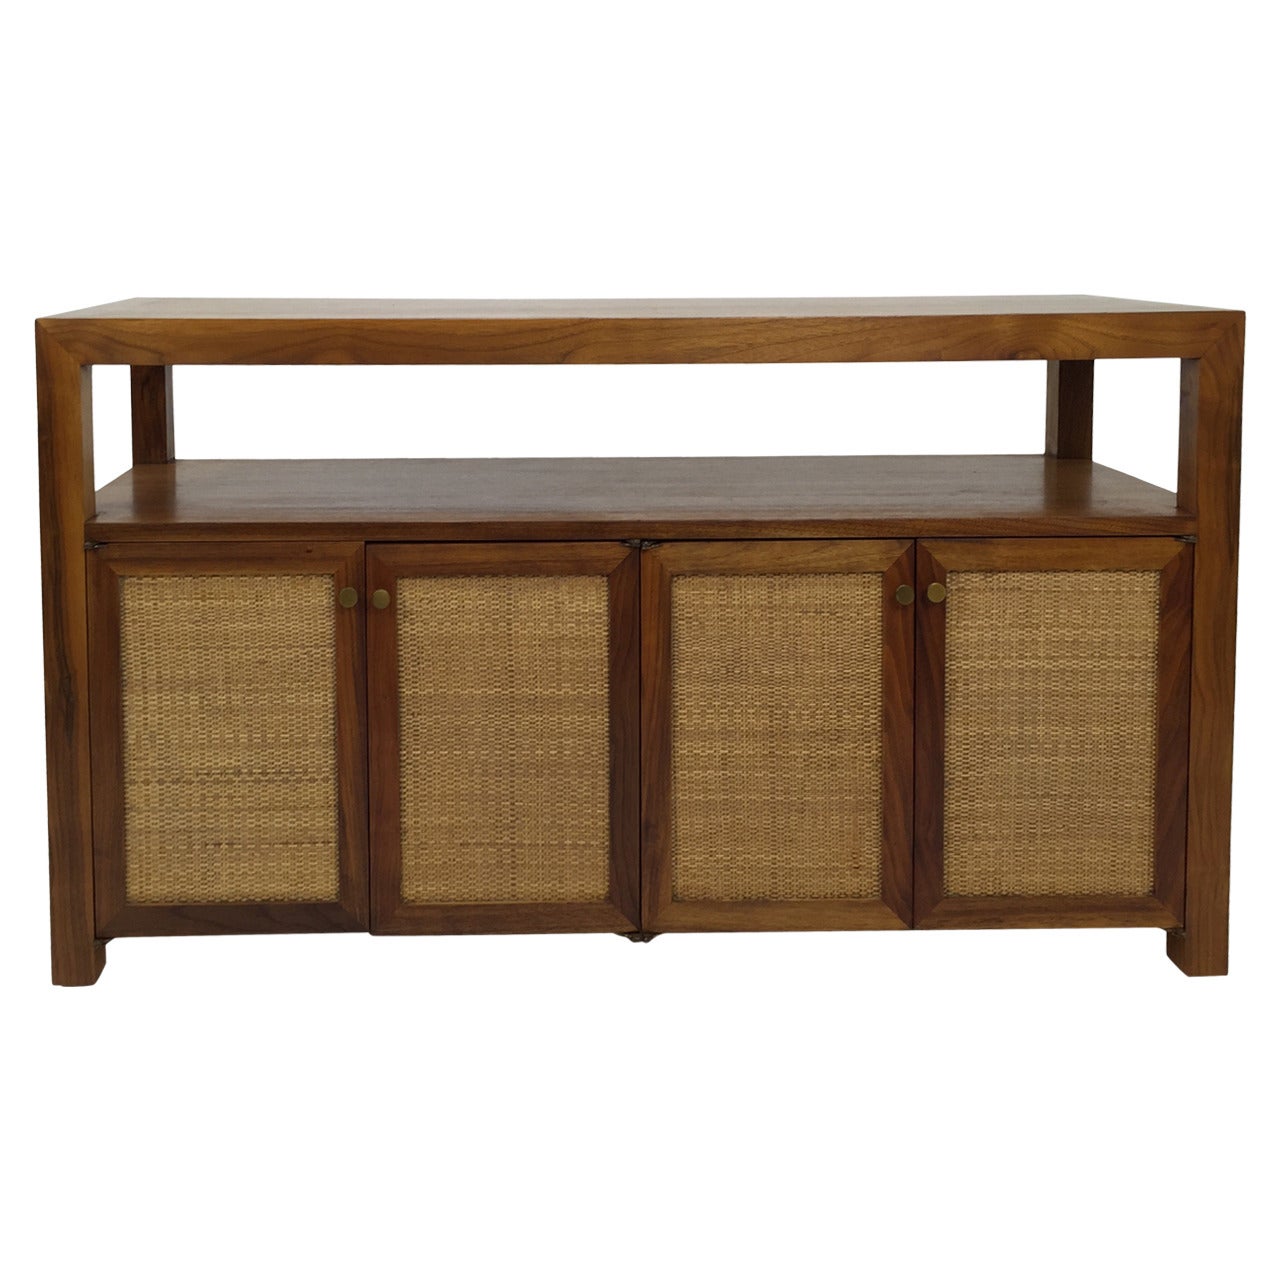 Parsons Style Walnut and Cane Credenza or Console